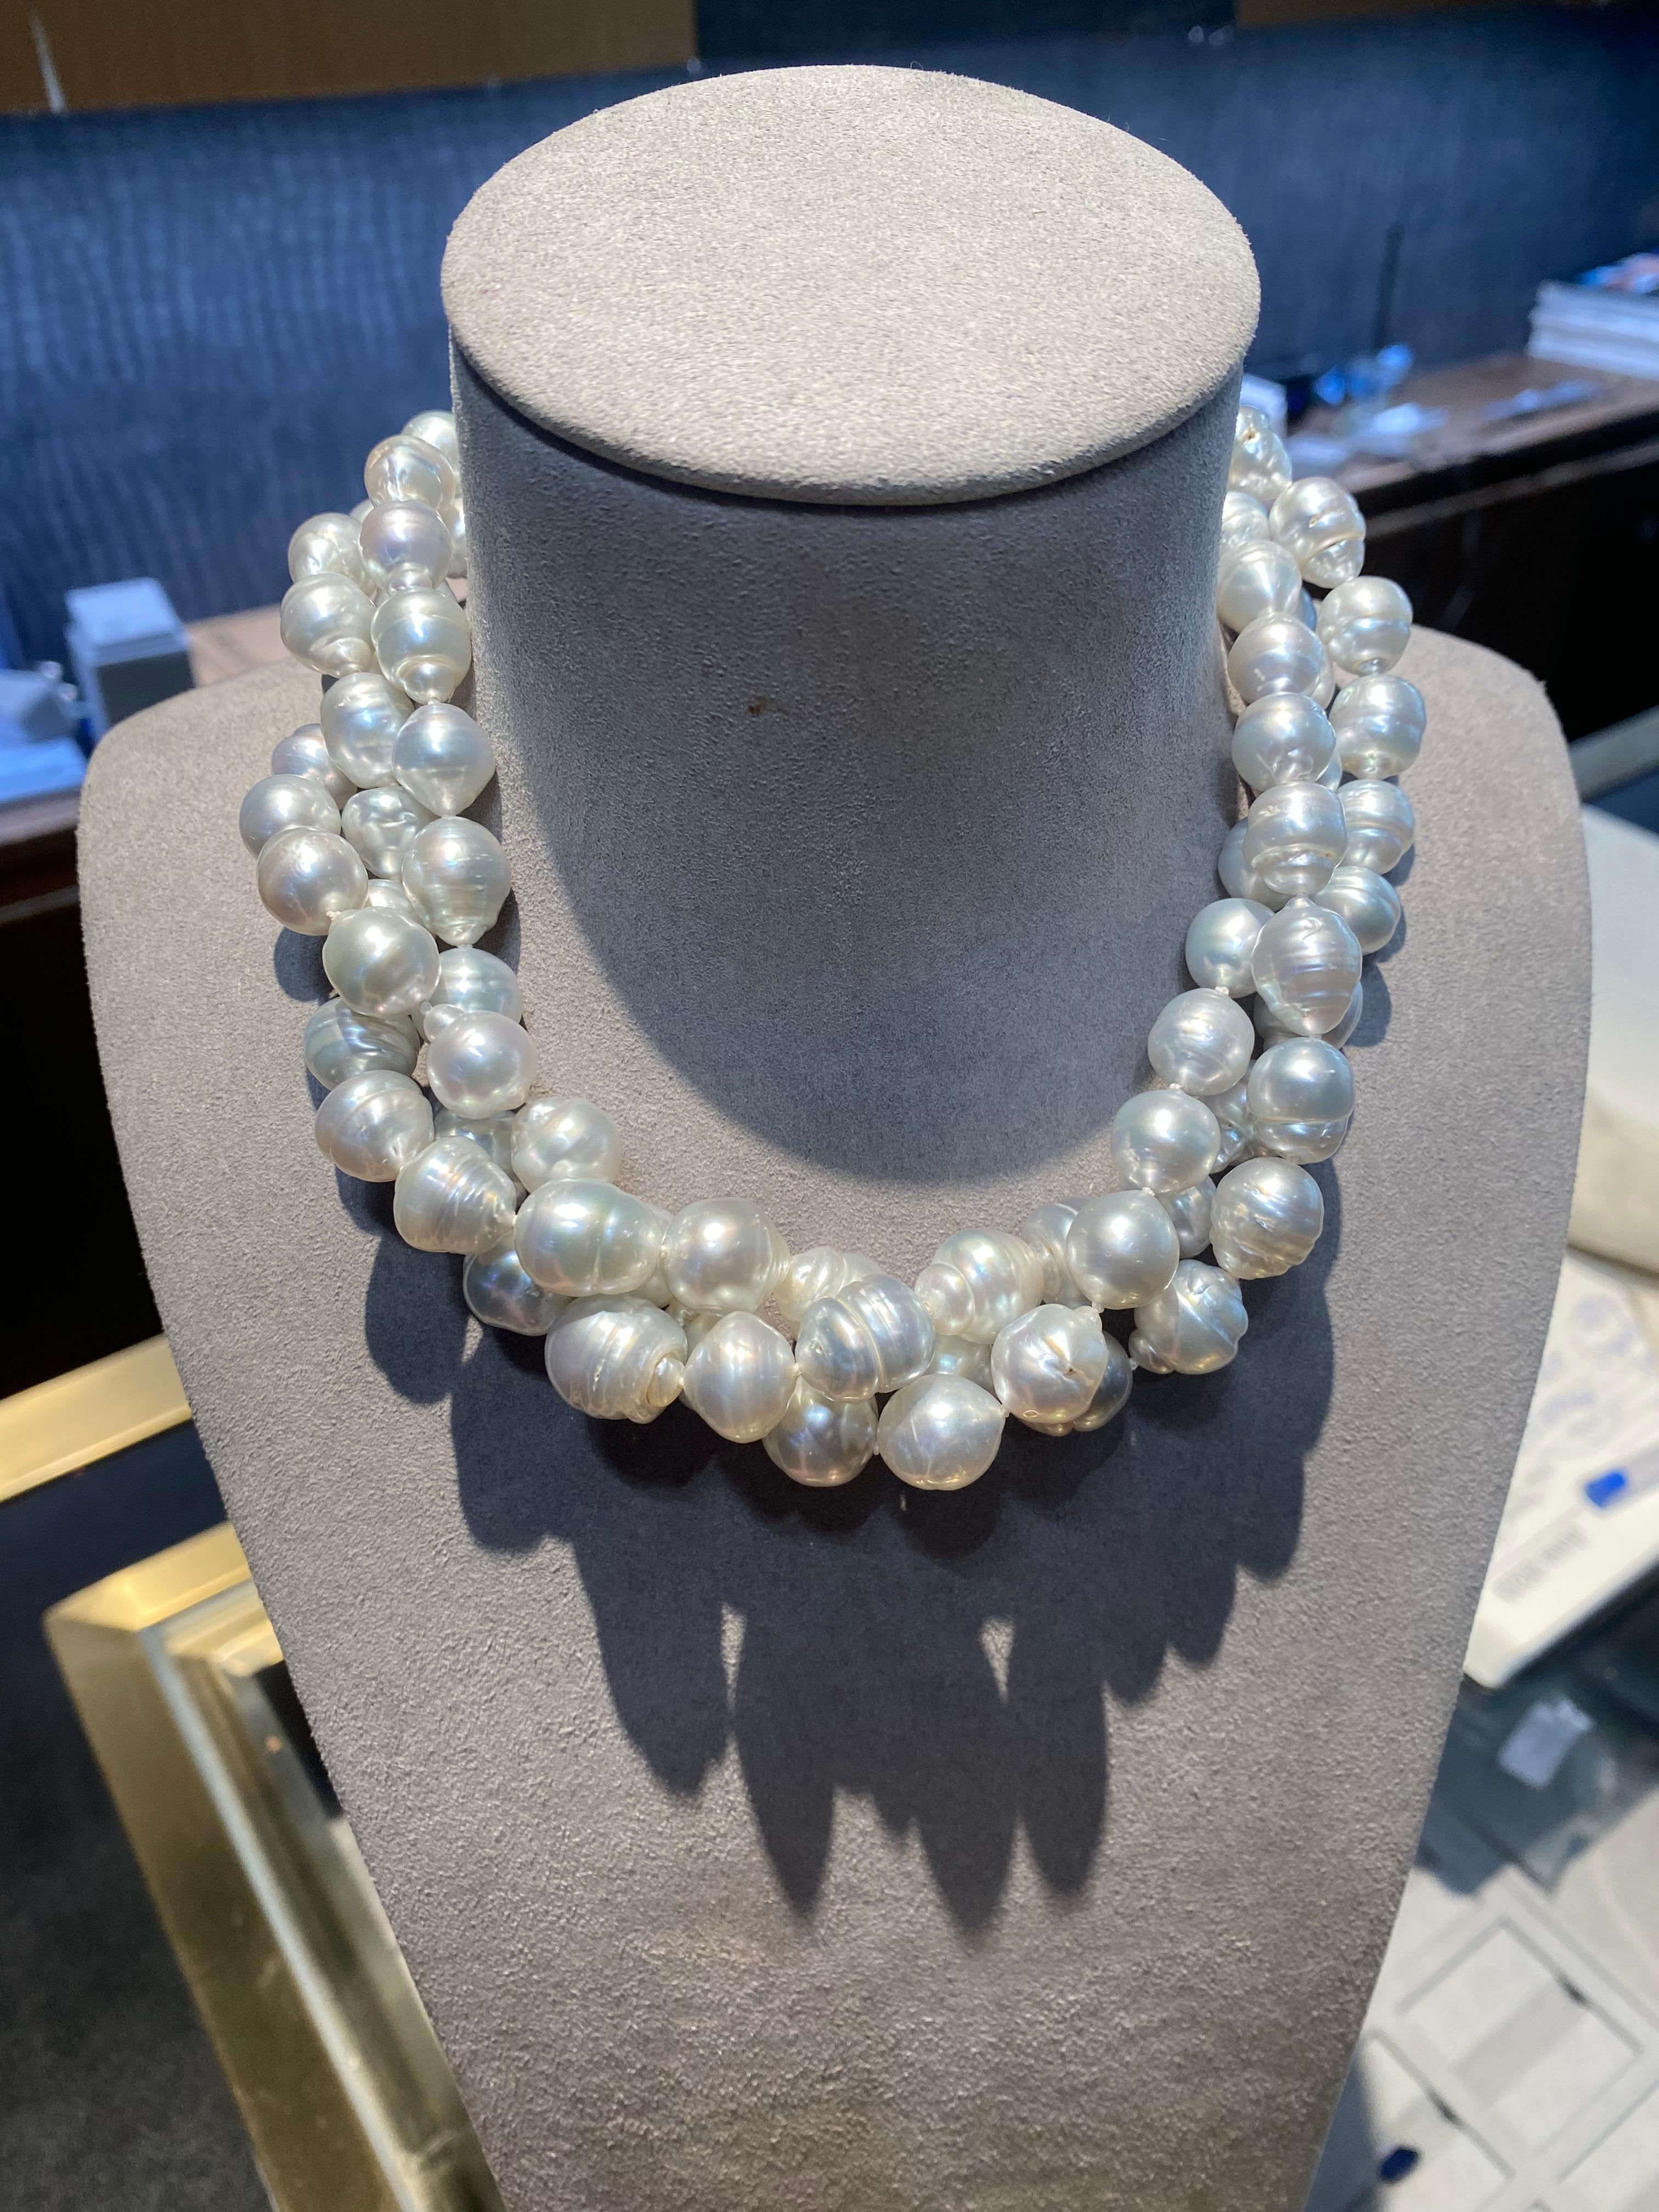 A Strand of white Colour pink tone Australian South Sea pearl necklace with 18K Gold Clasp. Pink tone is very sought after in south sea pearls and therefore more valuable. 

A 9 mm to 13 mm silver Colour pink tone south sea Pearl Necklace. It is a